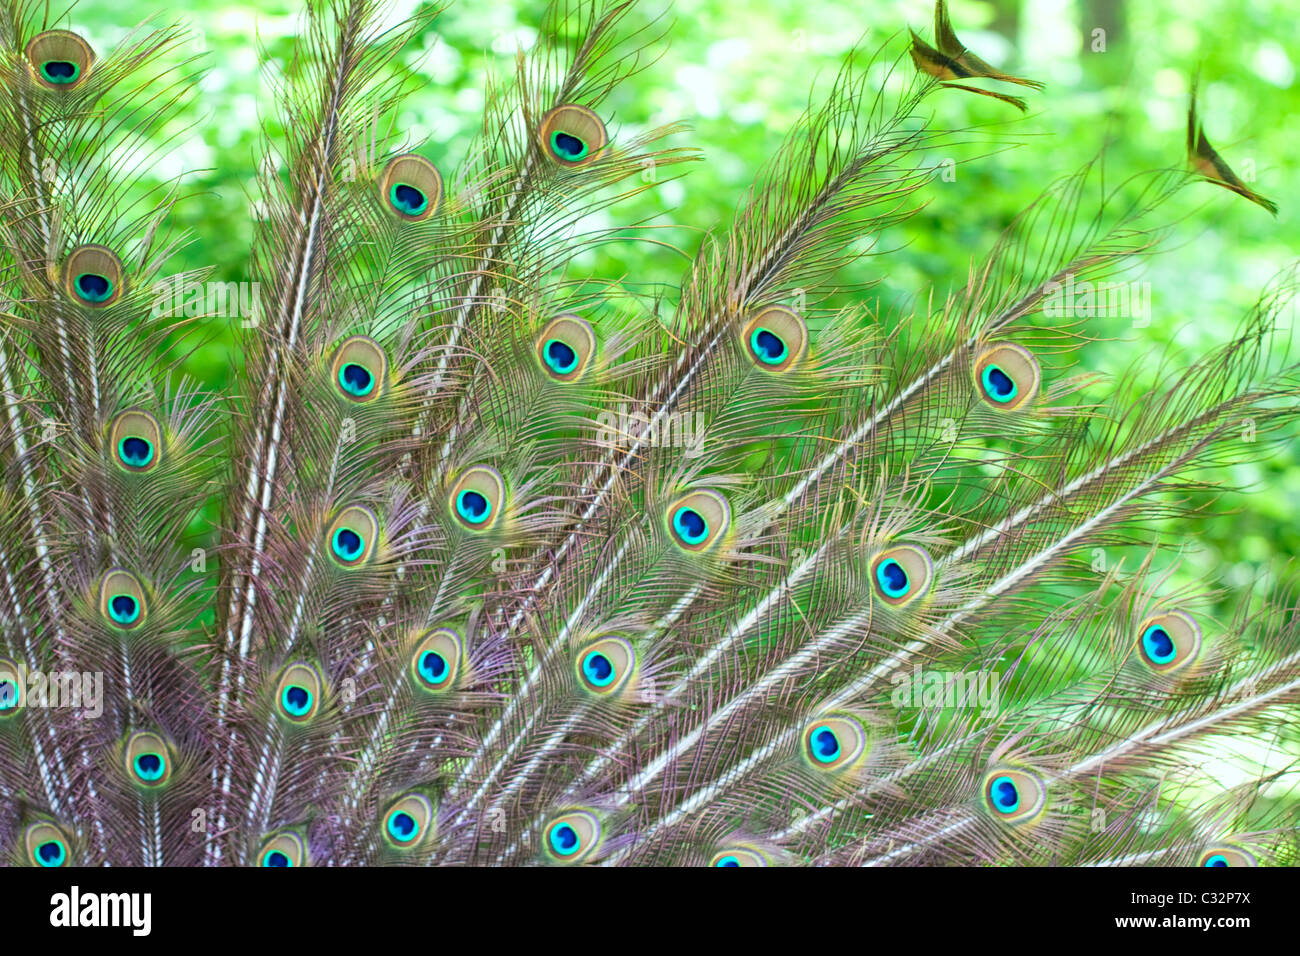 A peacock's tail spread out Stock Photo